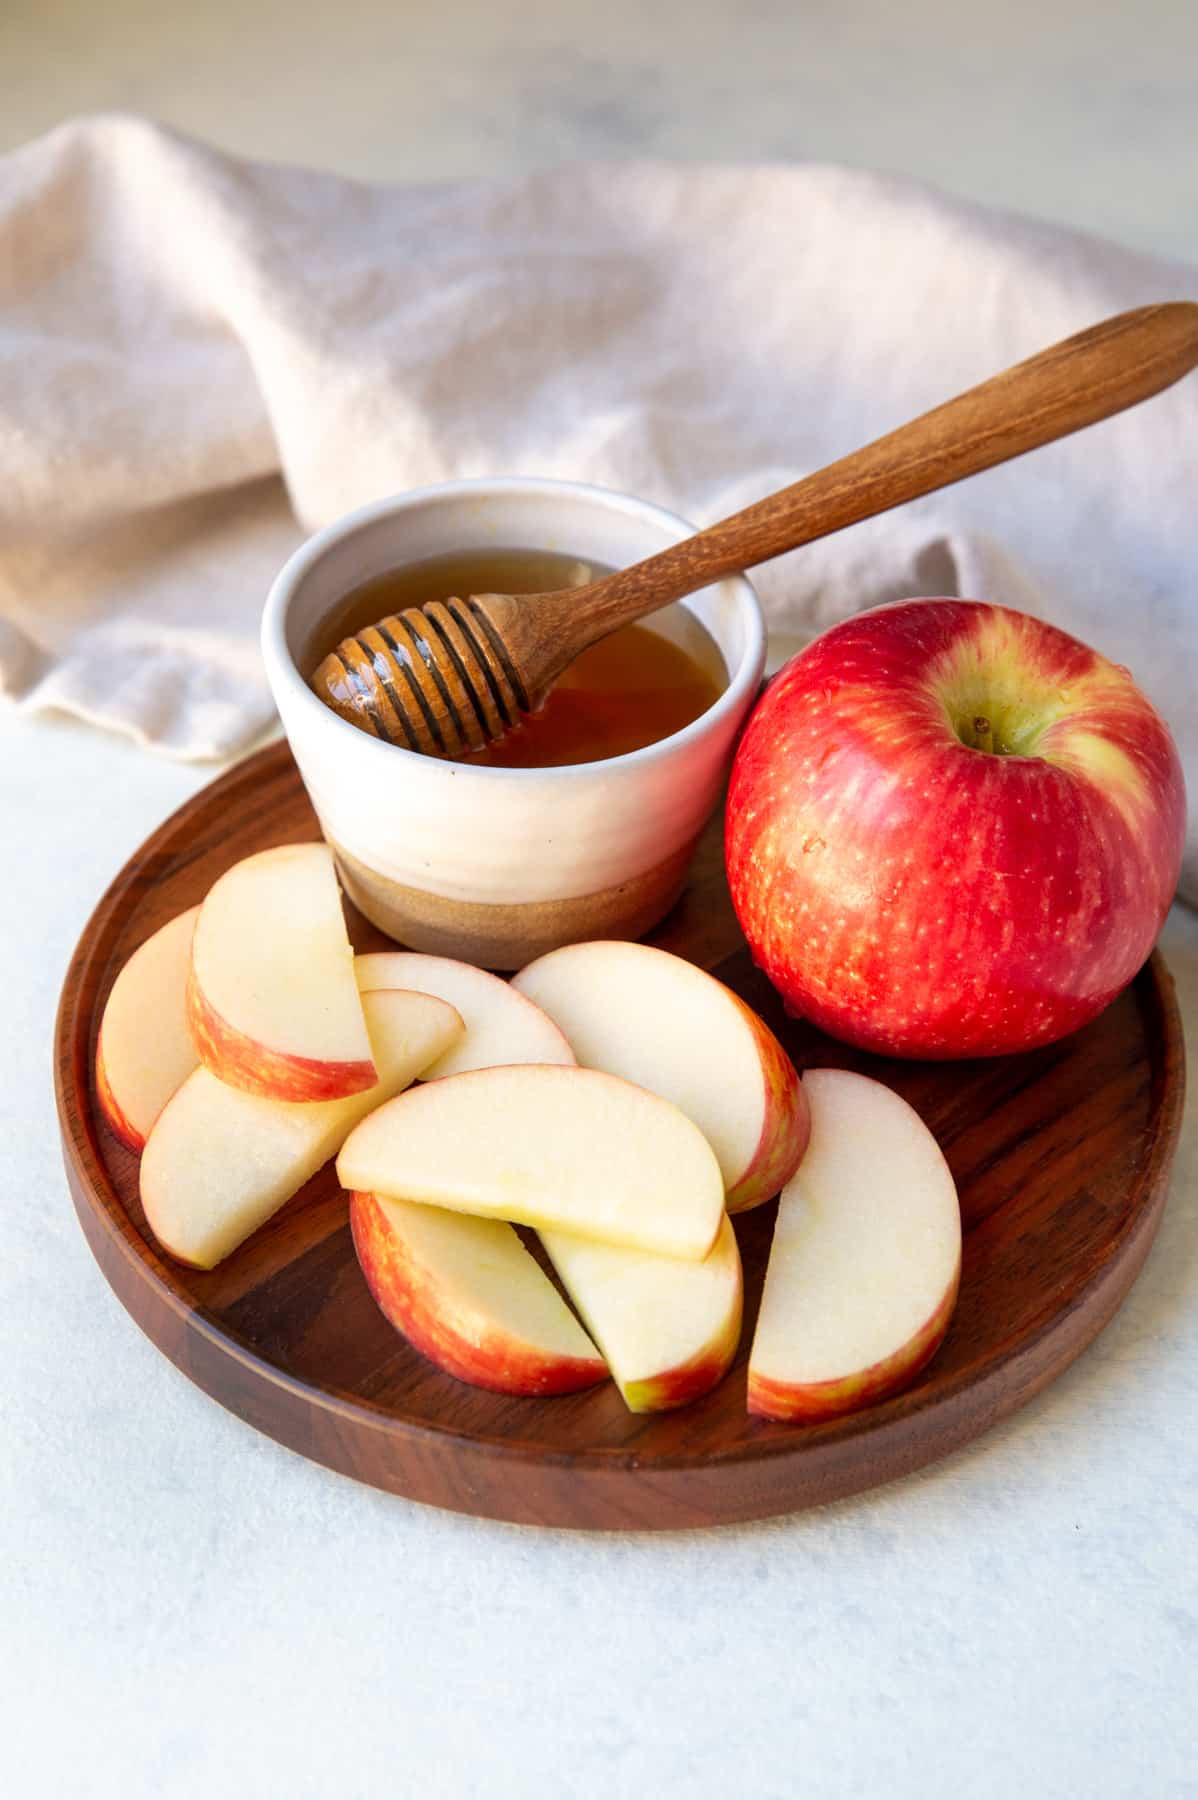 A plate of apples and honey for Rosh Hoshanah.